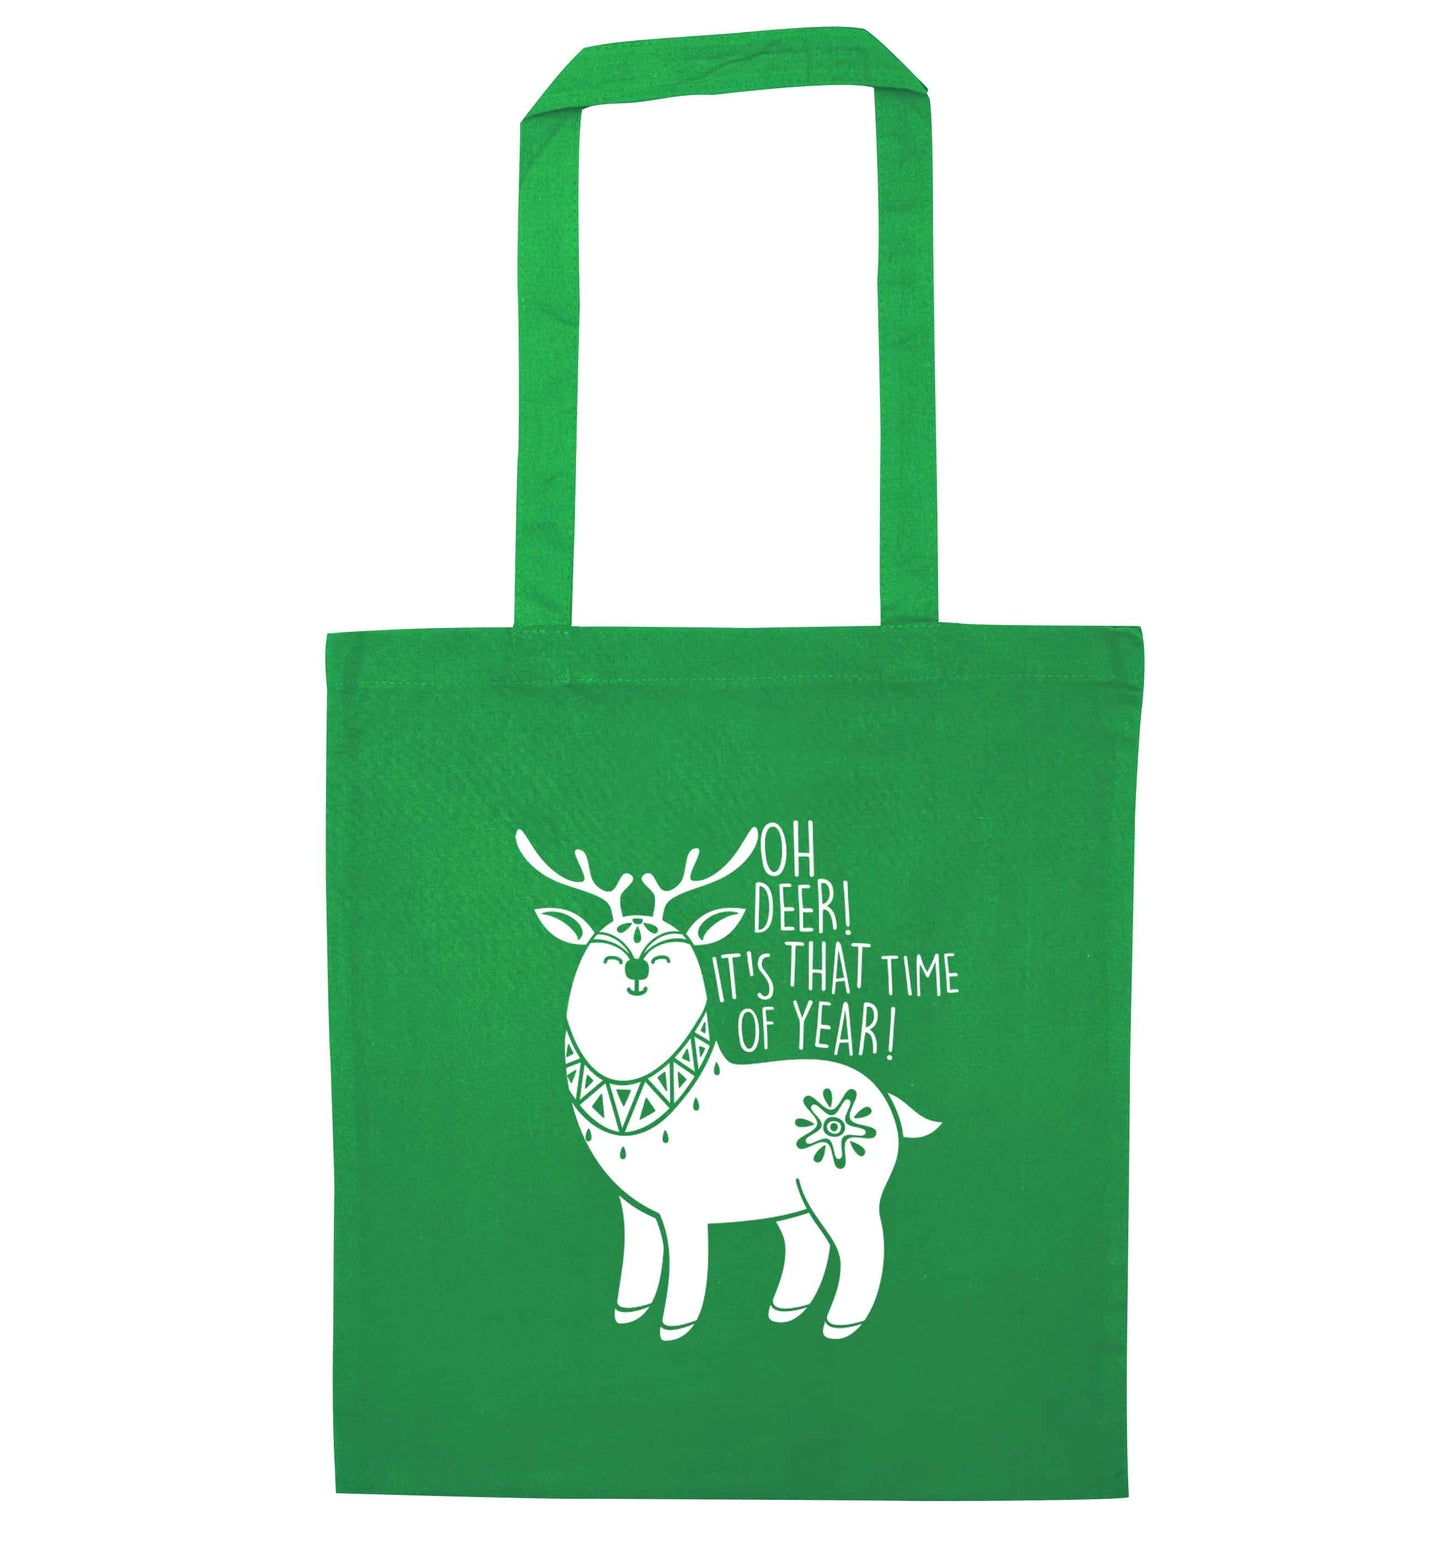 Oh dear it's that time of year green tote bag